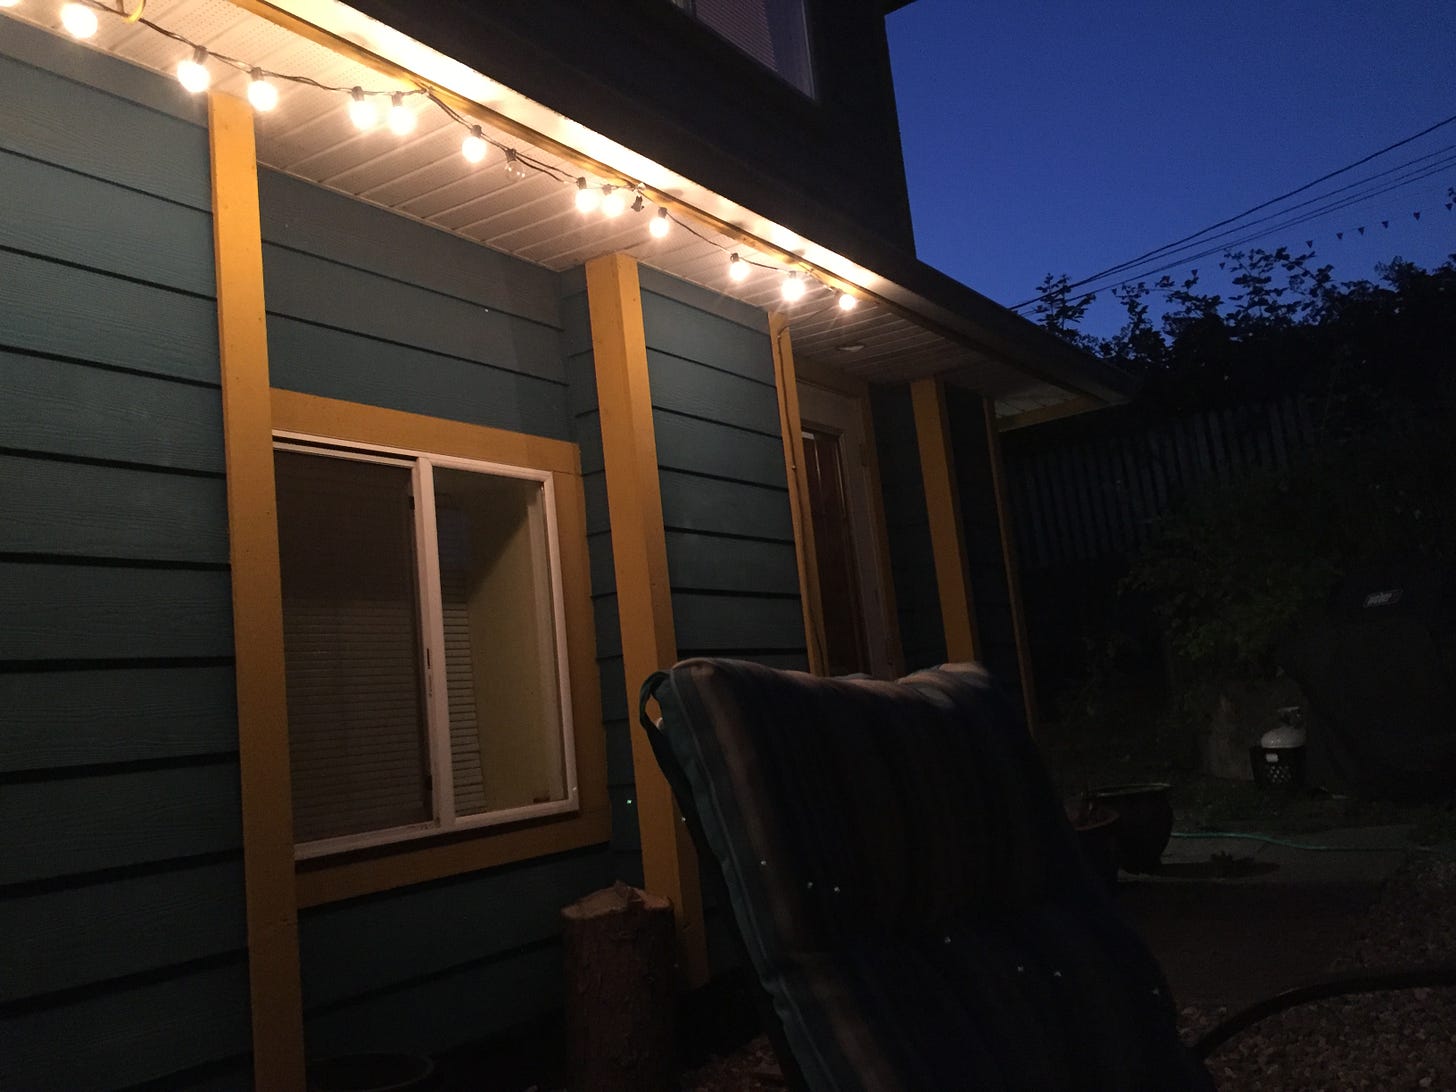 in a dark yard, patio lights create a warm glow from the eaves of a blue and yellow house. in the foreground, a dimly lit chair is visible. in the background, a patch of deep blue evening sky.